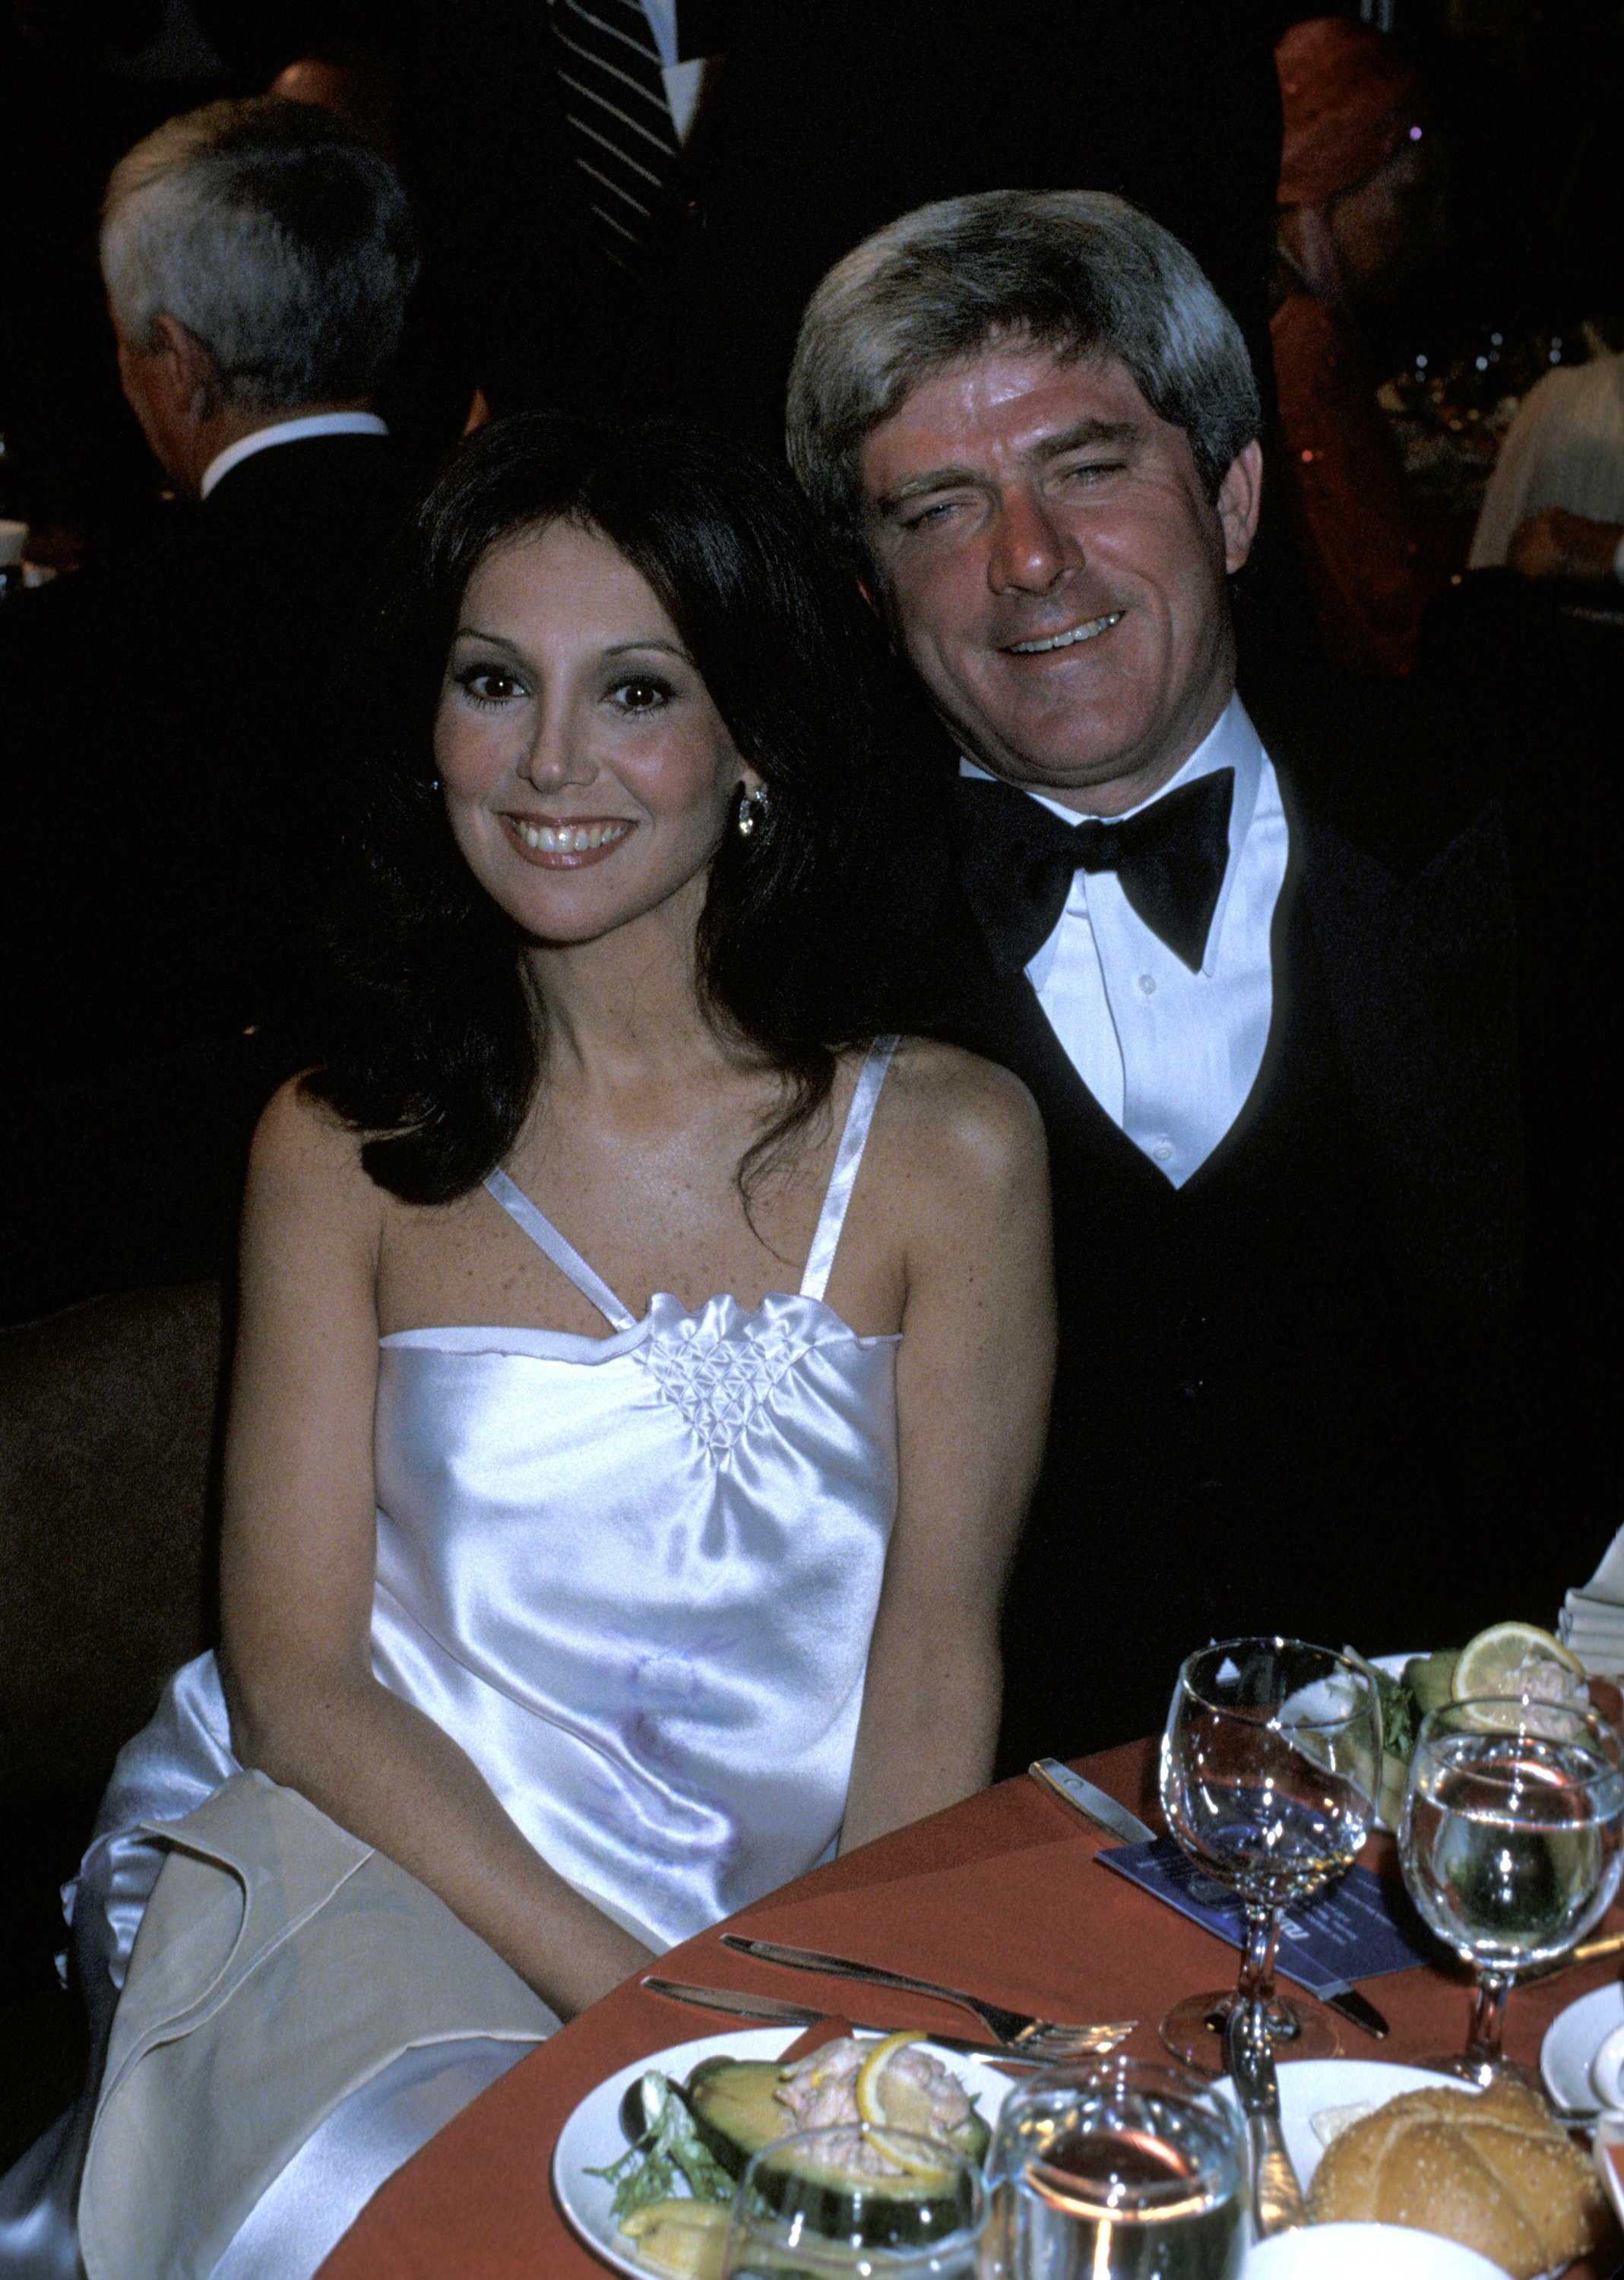 Marlo Thomas and Phil Donahue during the Iris Awards Banquet on March 4, 1978, in Los Angeles, California | Source: Getty Images